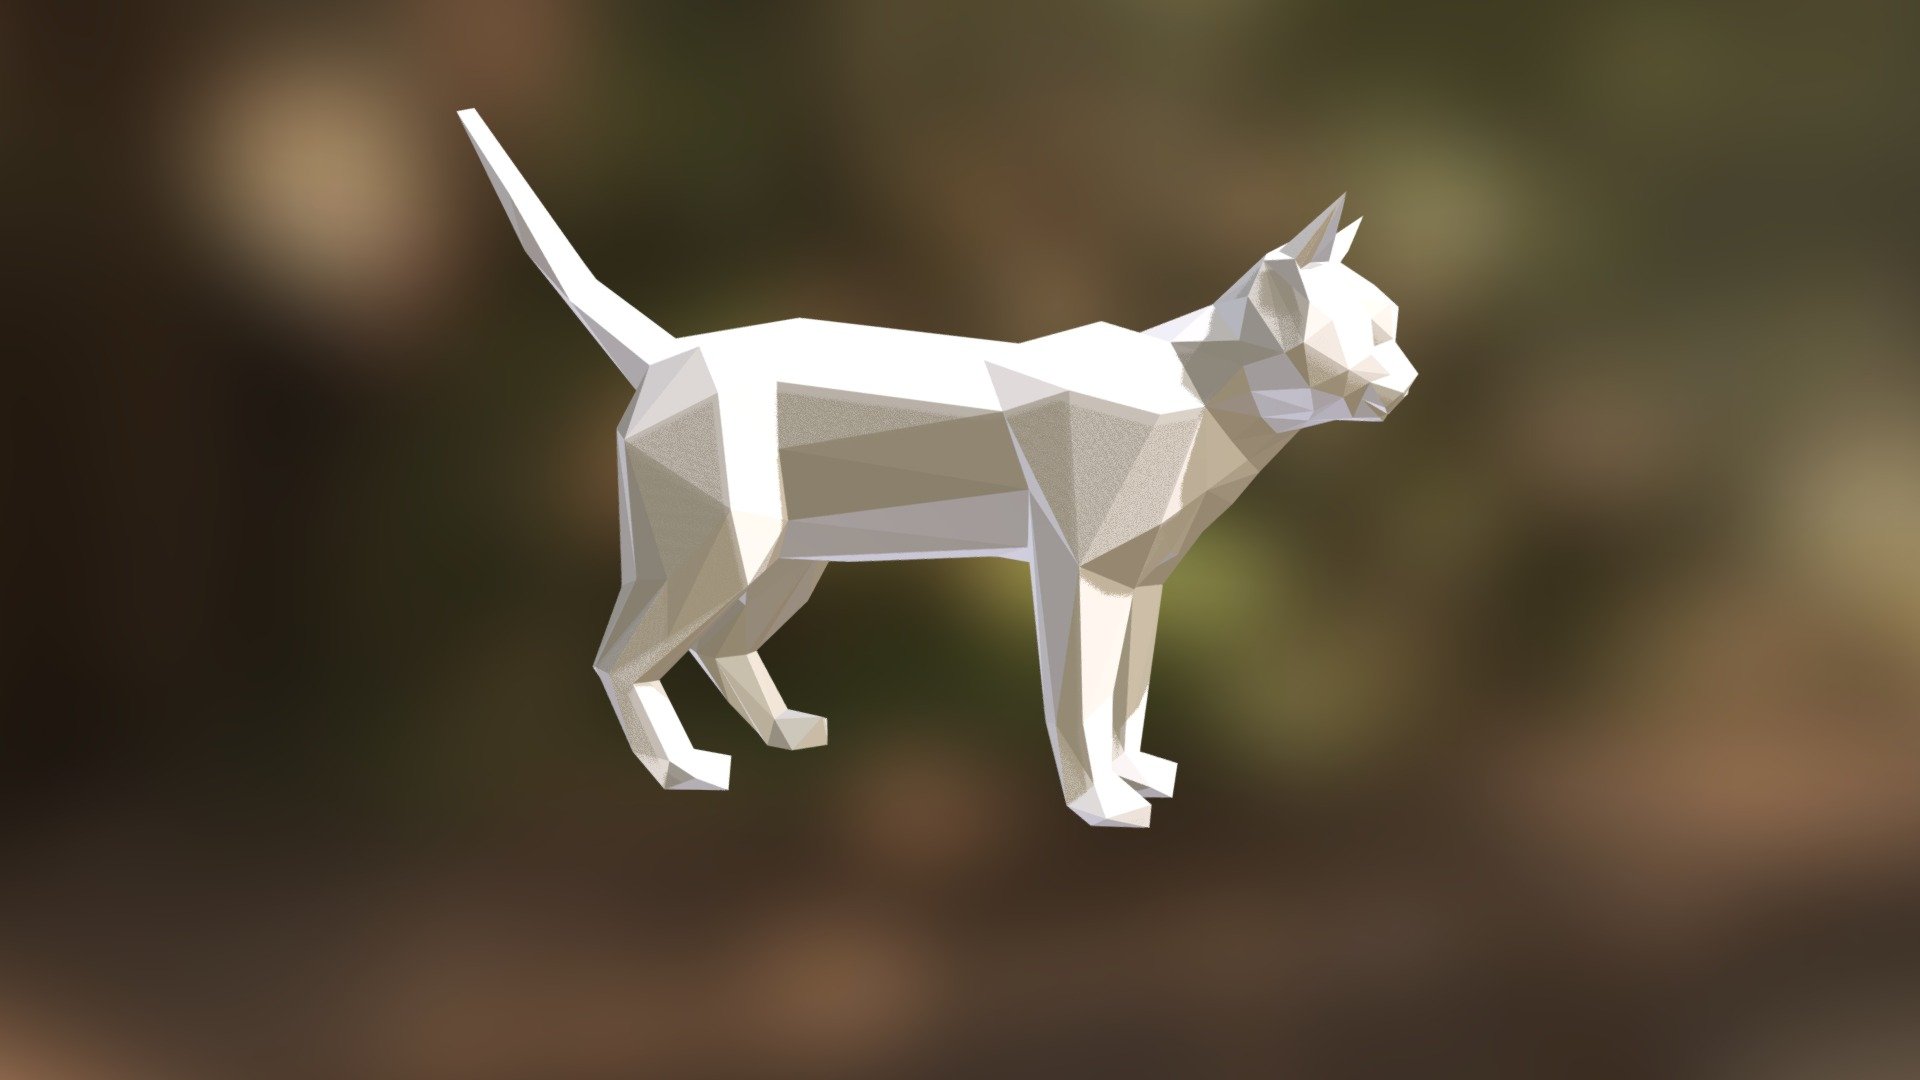 Low Poly 3D model for 3D printing. Cat Low Poly sculpture.  You can find this model for 3D printing in my shop:  -link removed-  Reference model: http://www.cadnav.com - Cat low poly model for 3D printing 3d model